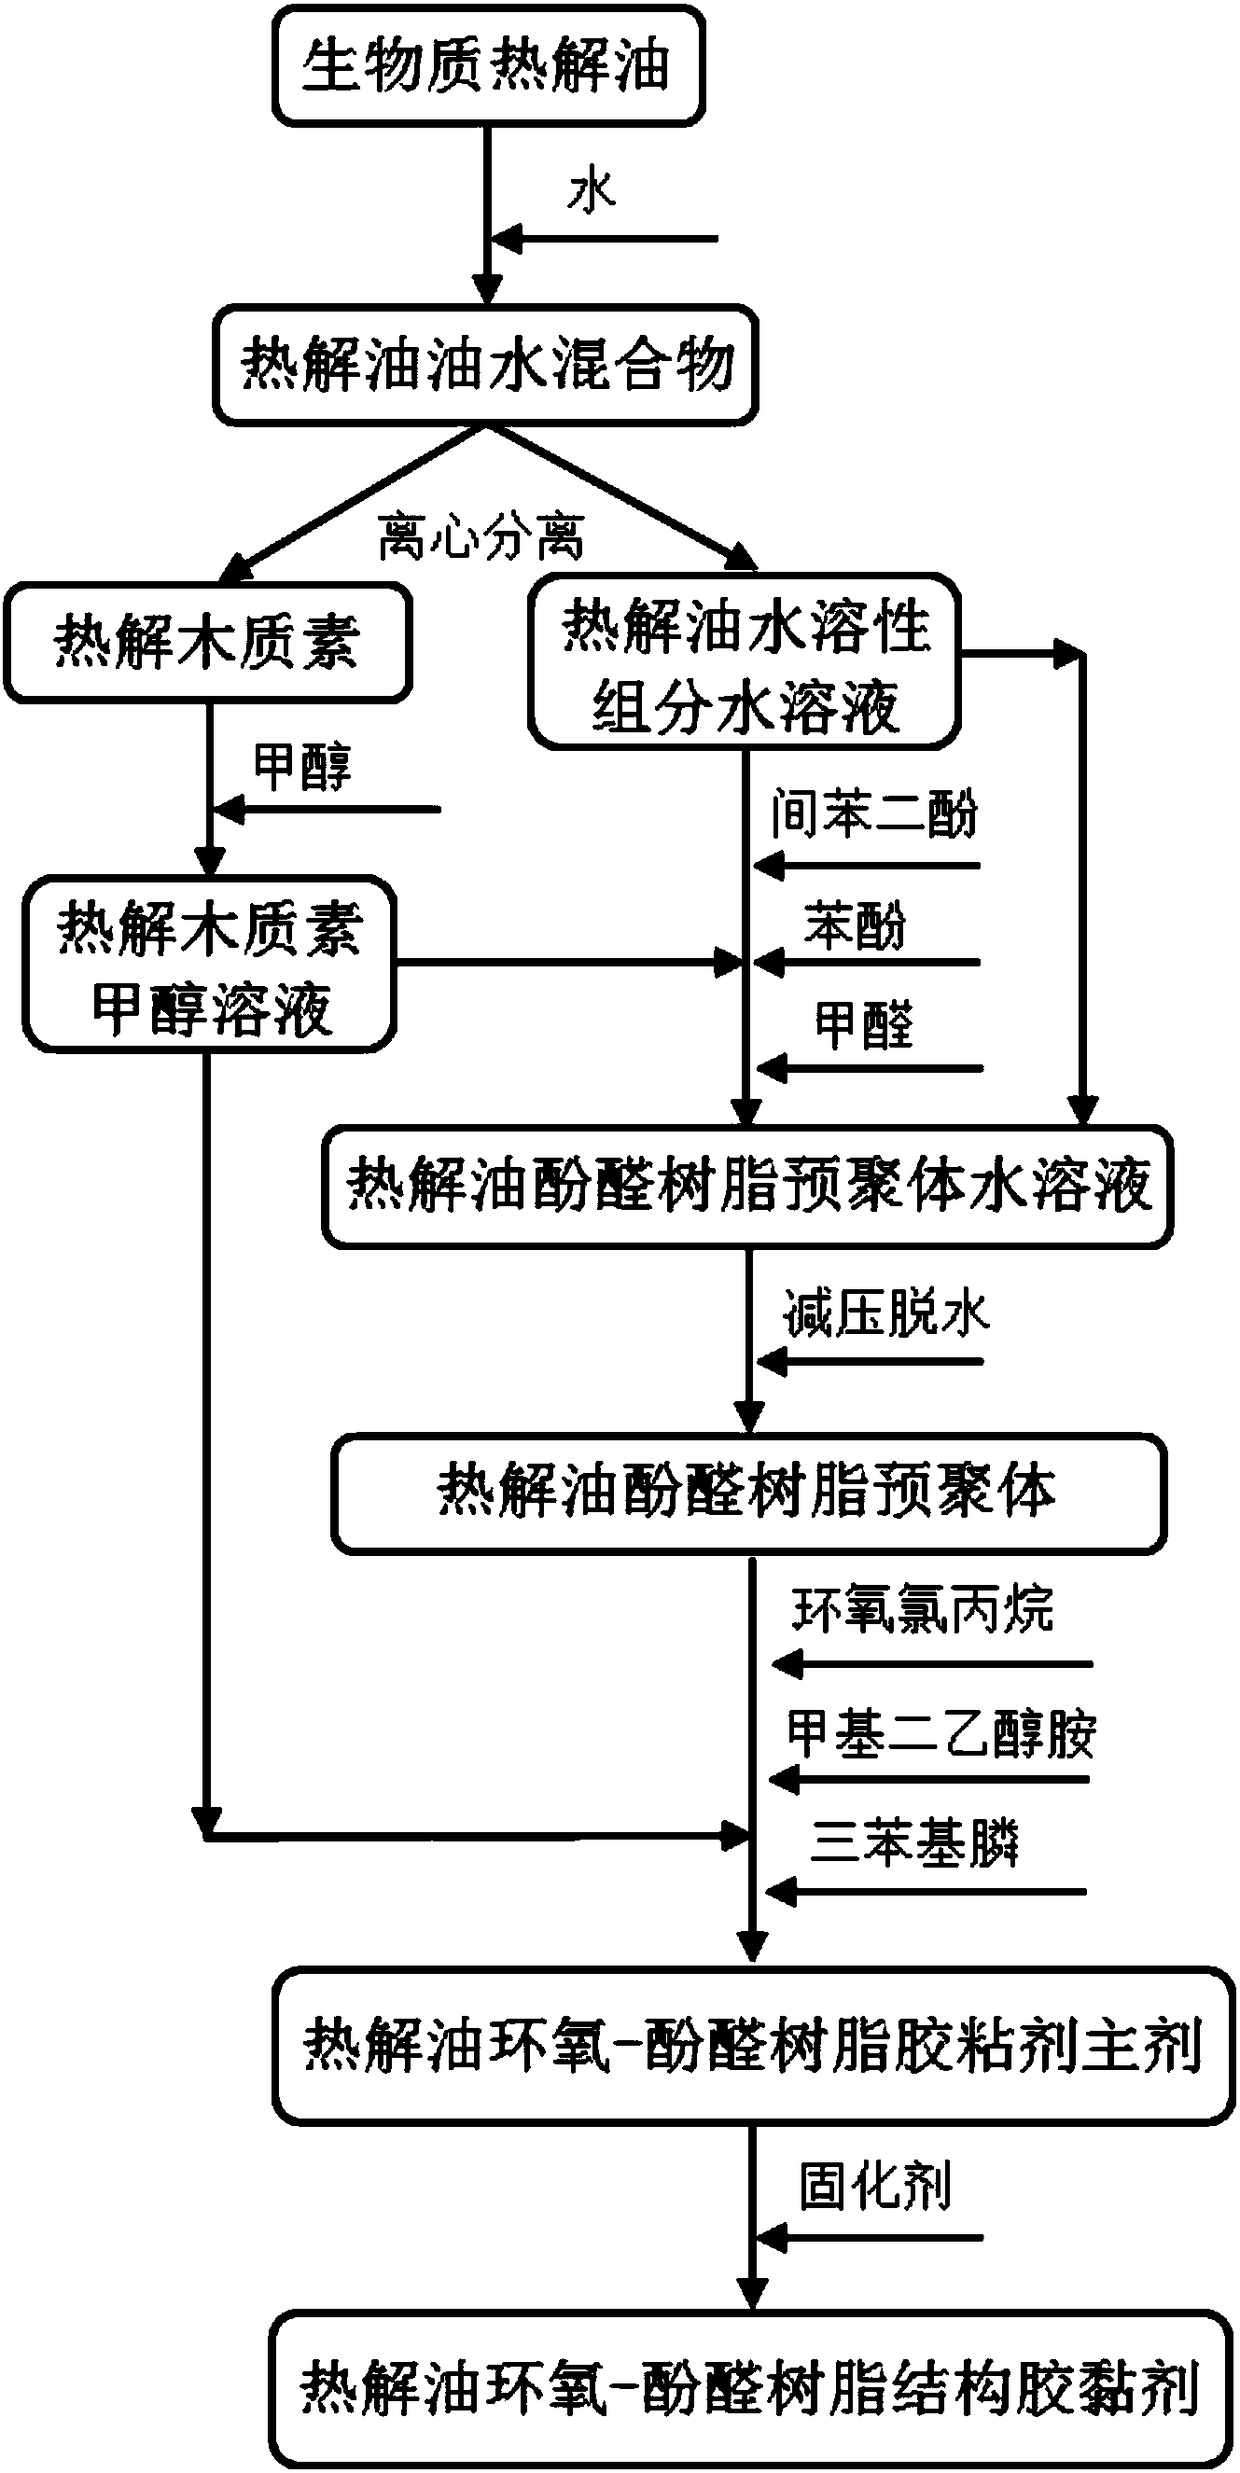 Preparation method of normal temperature curing biomass pyrolysis oil-based structure adhesive